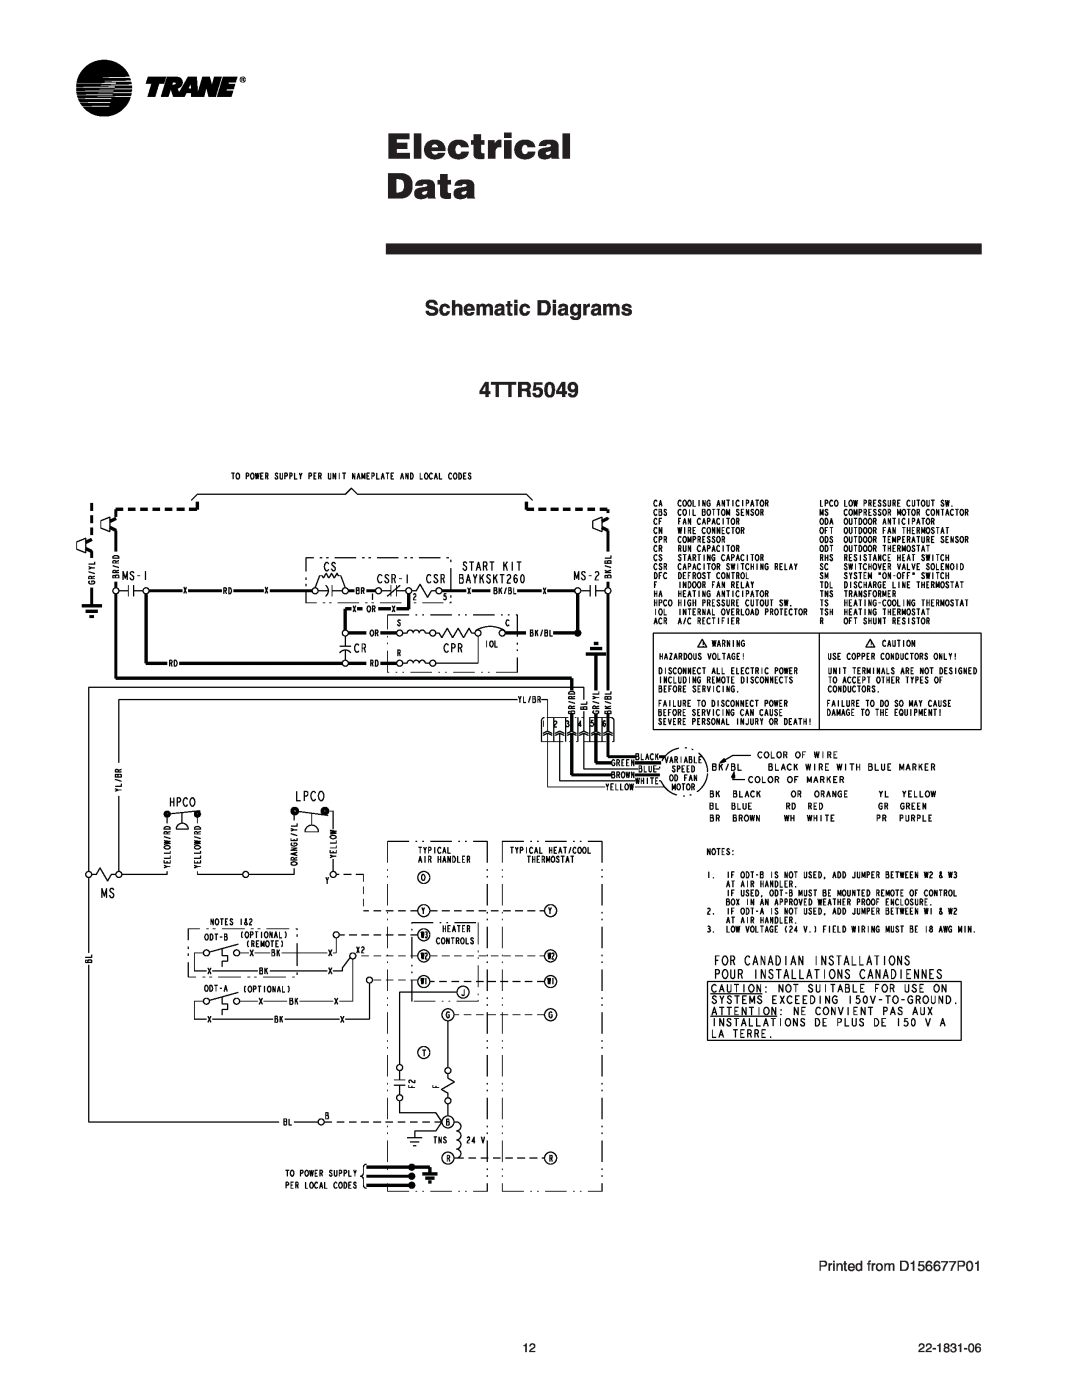 Trane XR15 manual Electrical Data, Schematic Diagrams 4TTR5049, Printed from D156677P01 